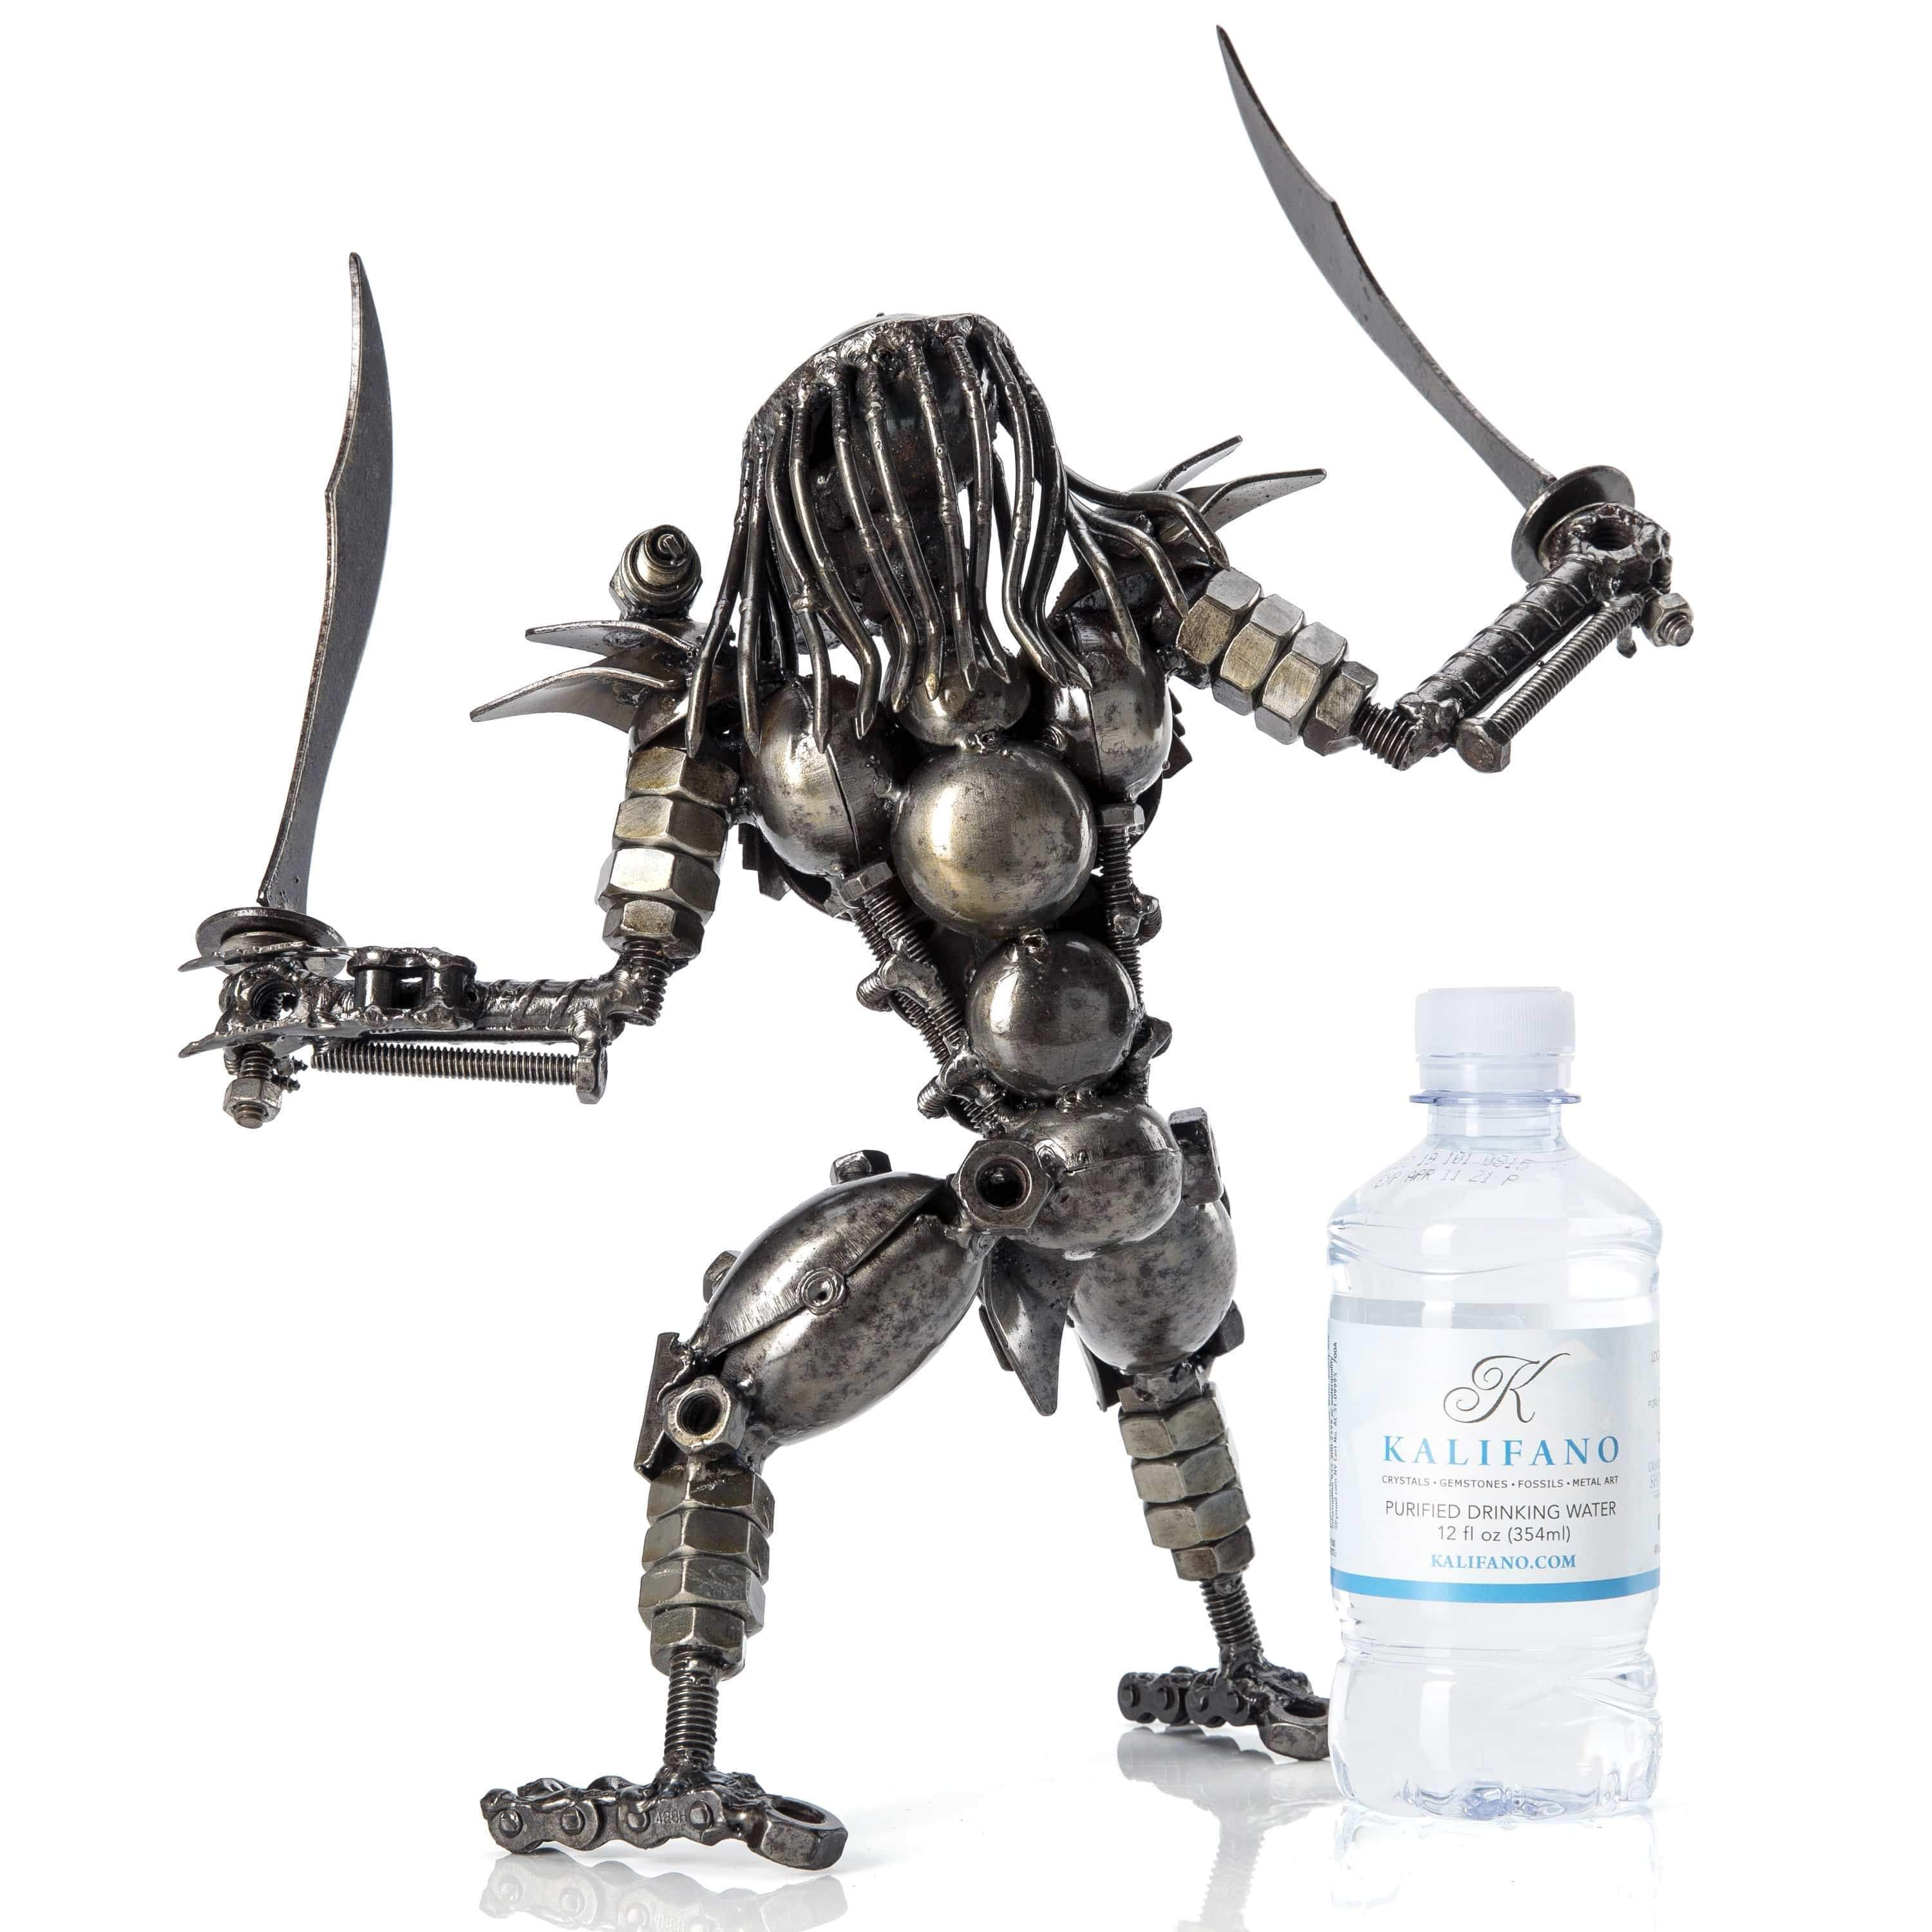 KALIFANO Recycled Metal Art Predator with Dual Wielded Sword Inspired Recycled Metal Sculpture RMS-700PD-N